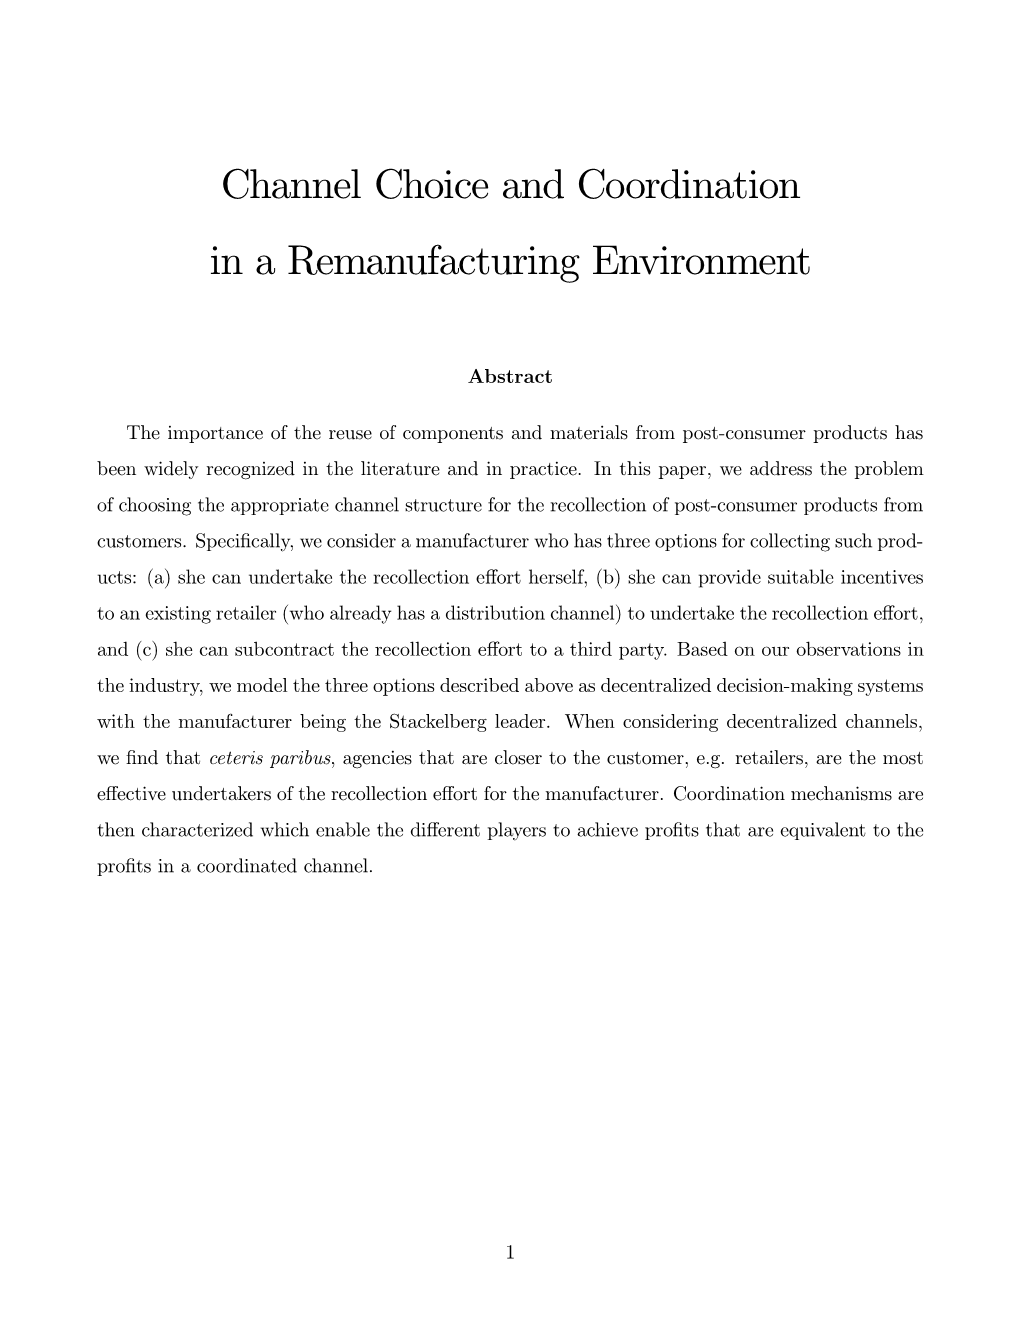 Channel Choice and Coordination in a Remanufacturing Environment